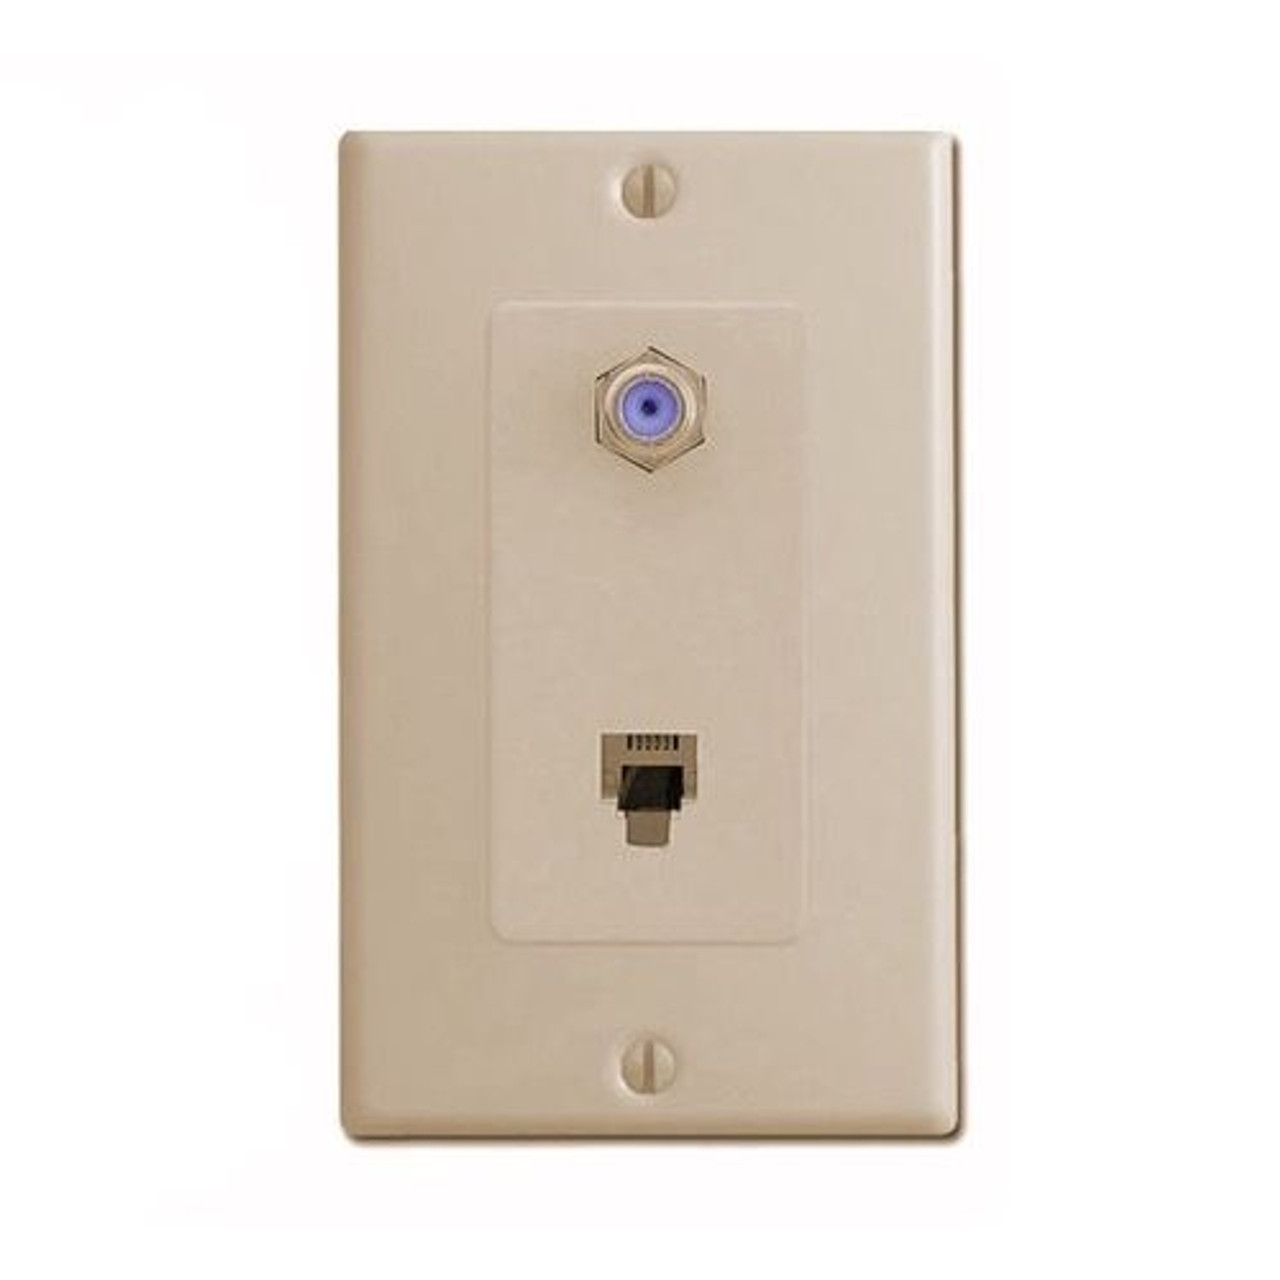 Steren 300-235IV Wall Plate Telephone F Jack Ivory 3 GHz RJ11 F-81 F-Connector Phone Modular 6P4C Jack Coax Combo Jack TV Antenna Video Coaxial Cable Connectors